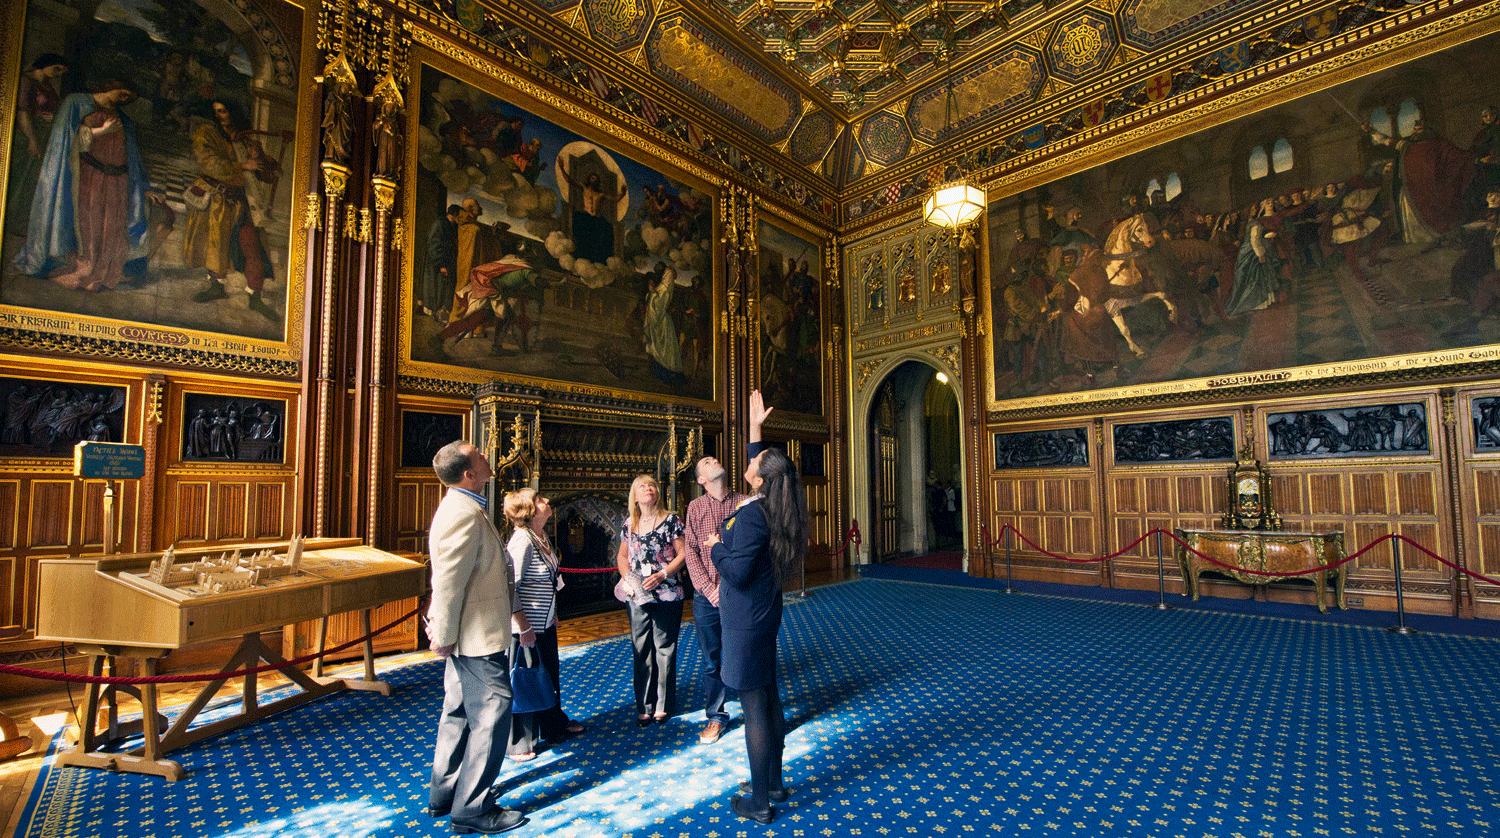 The Queen's Robing Room